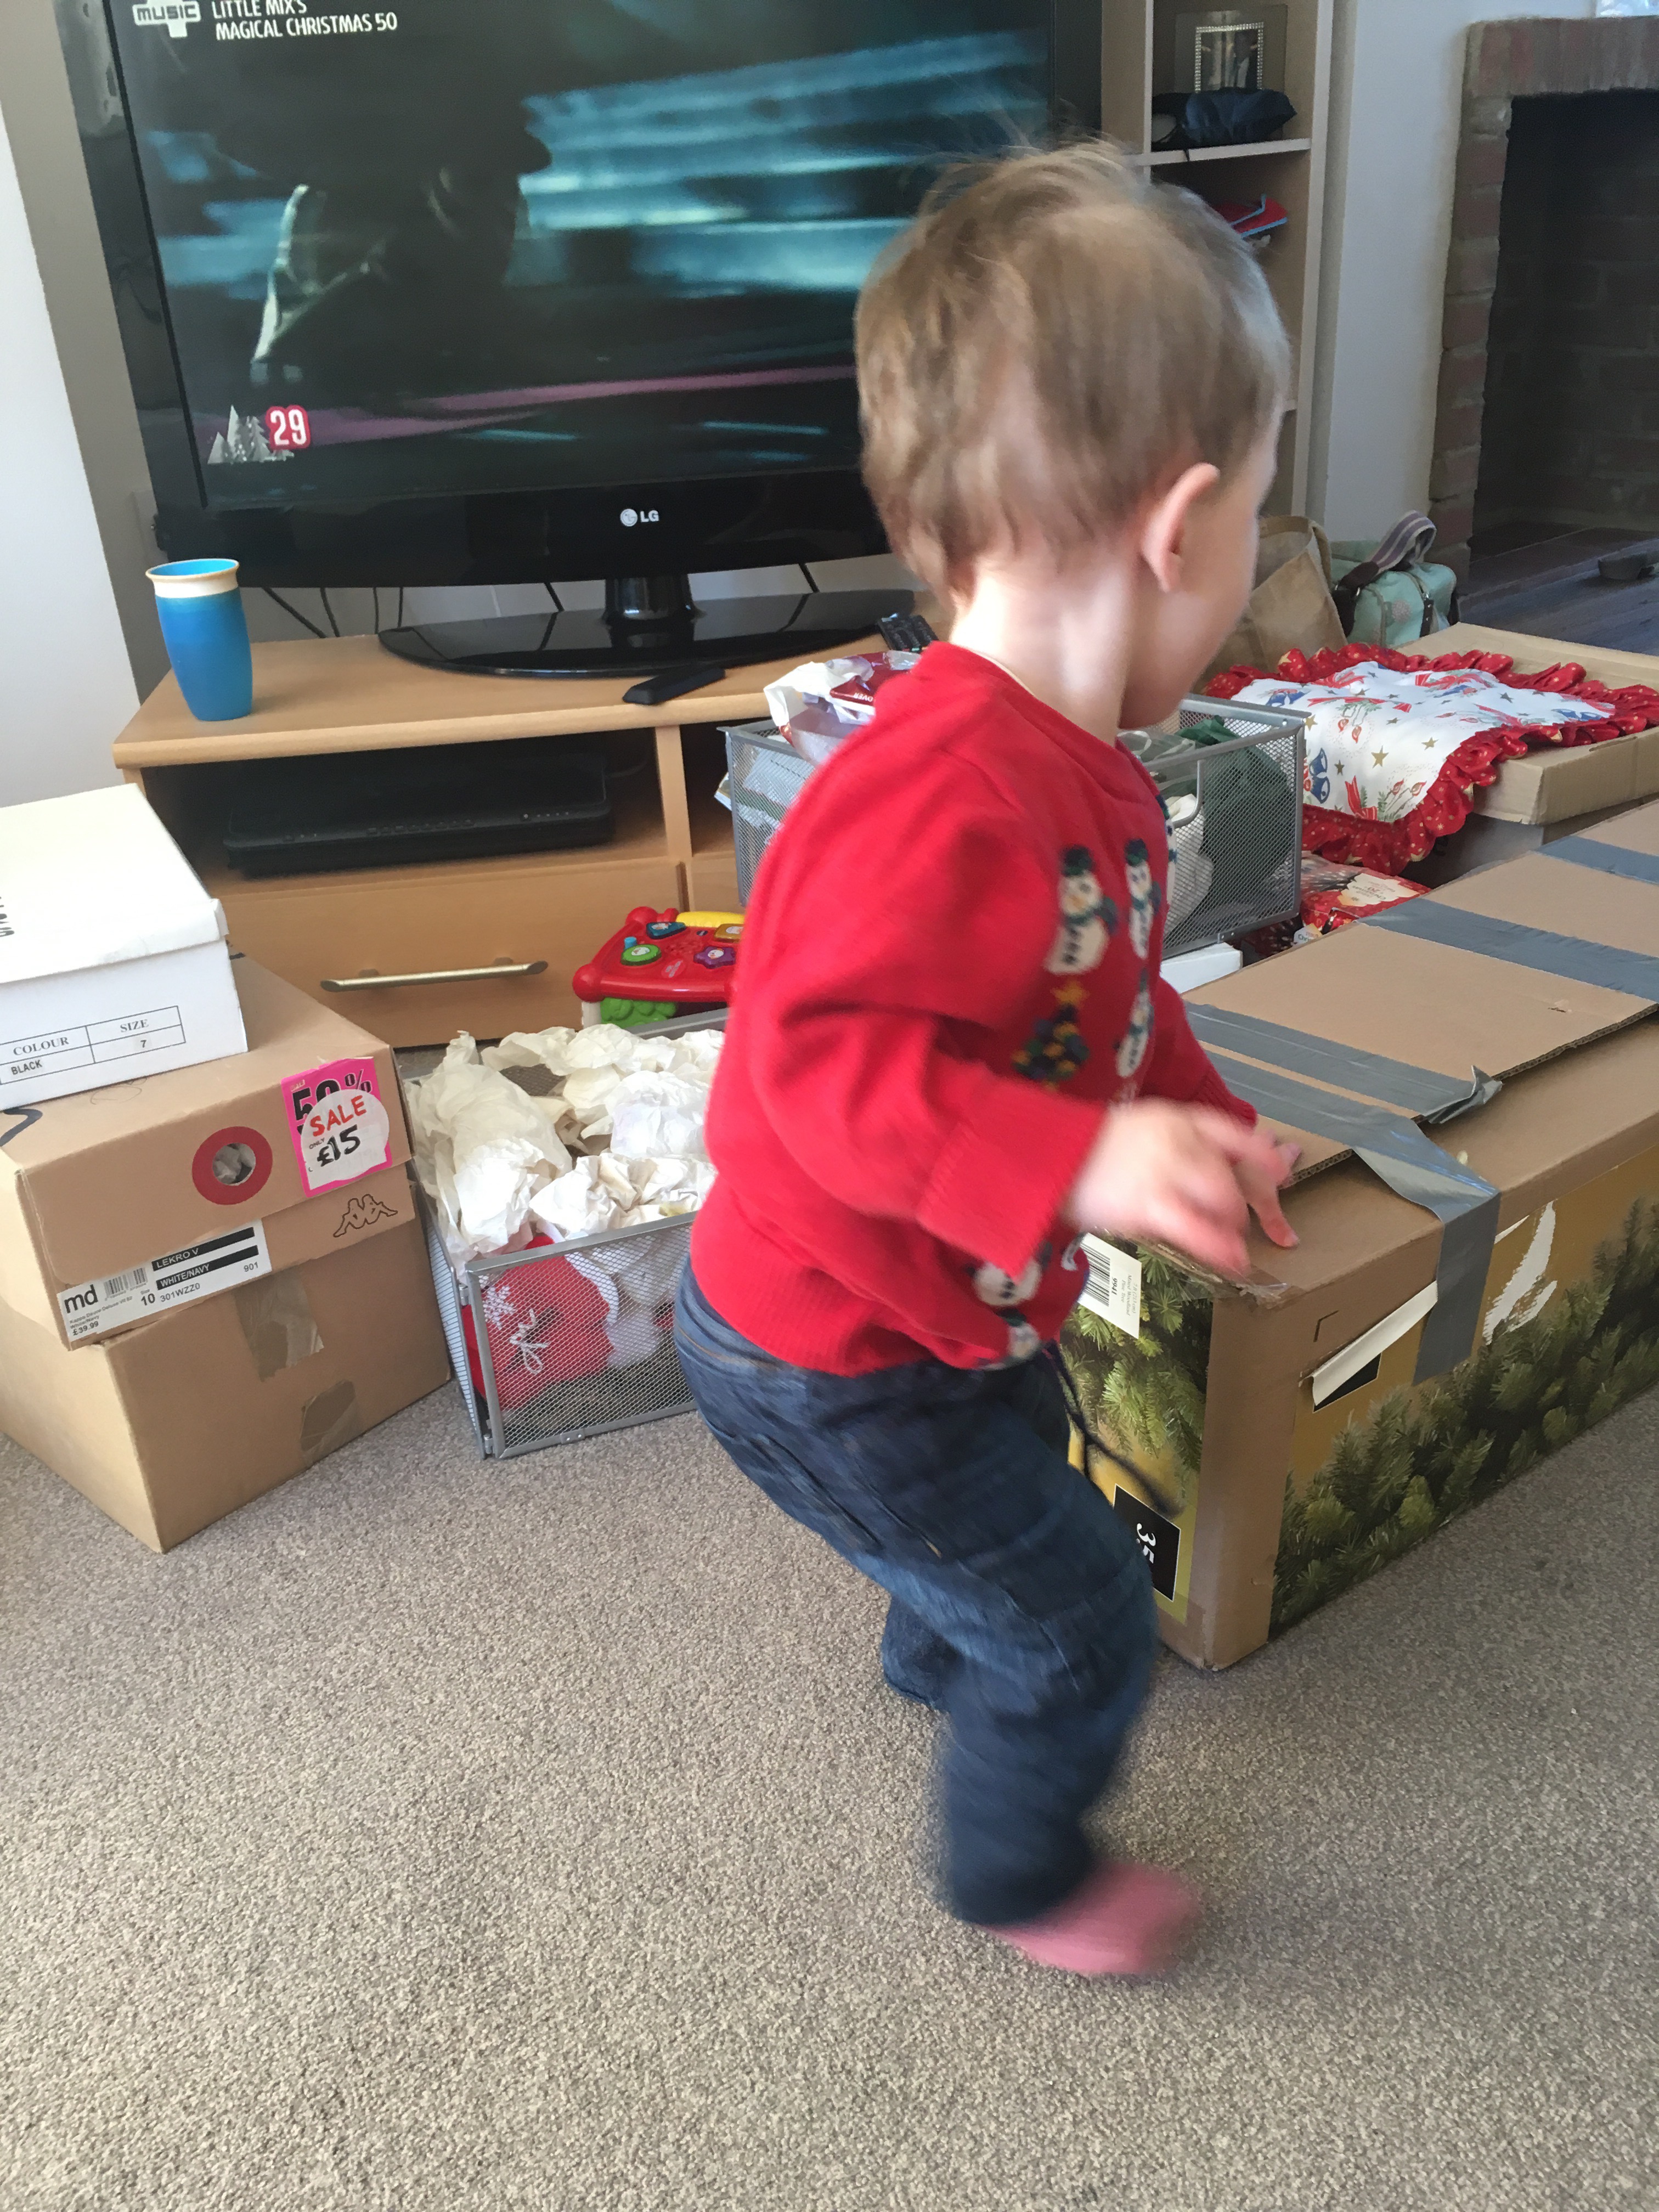 Toddler and boxes.